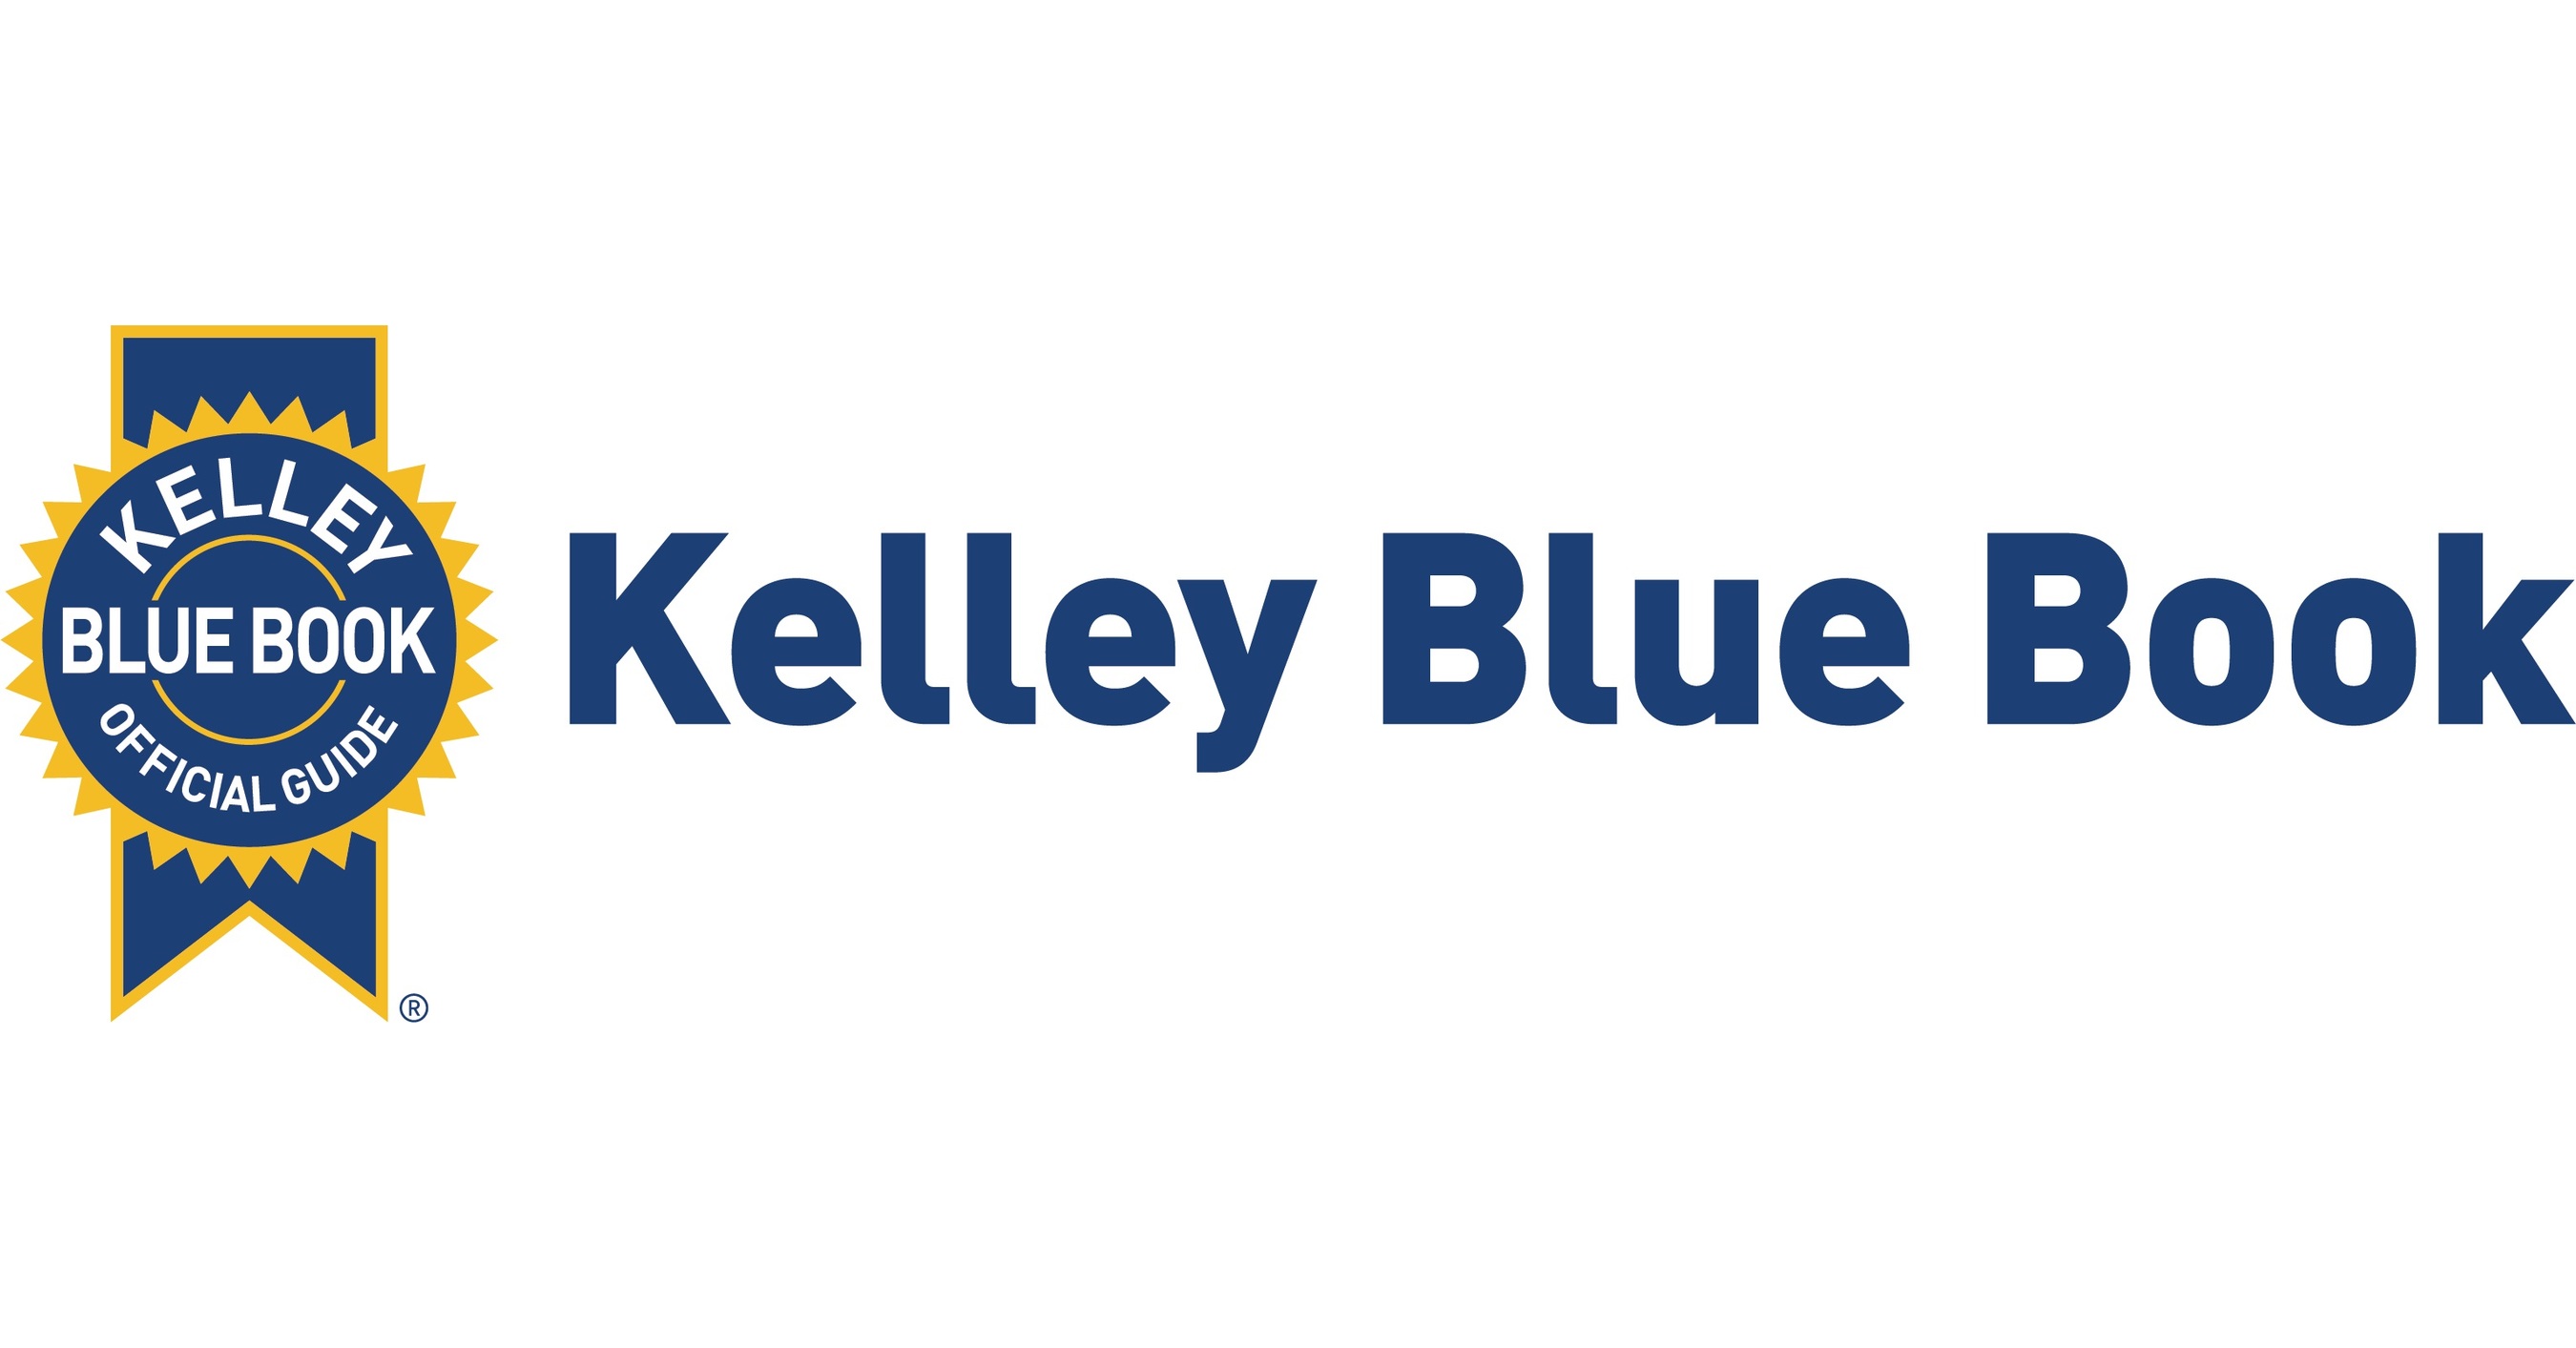 after-nearly-two-years-new-vehicle-transaction-prices-fall-below-sticker-price-in-march-2023-according-to-new-data-from-kelley-blue-book